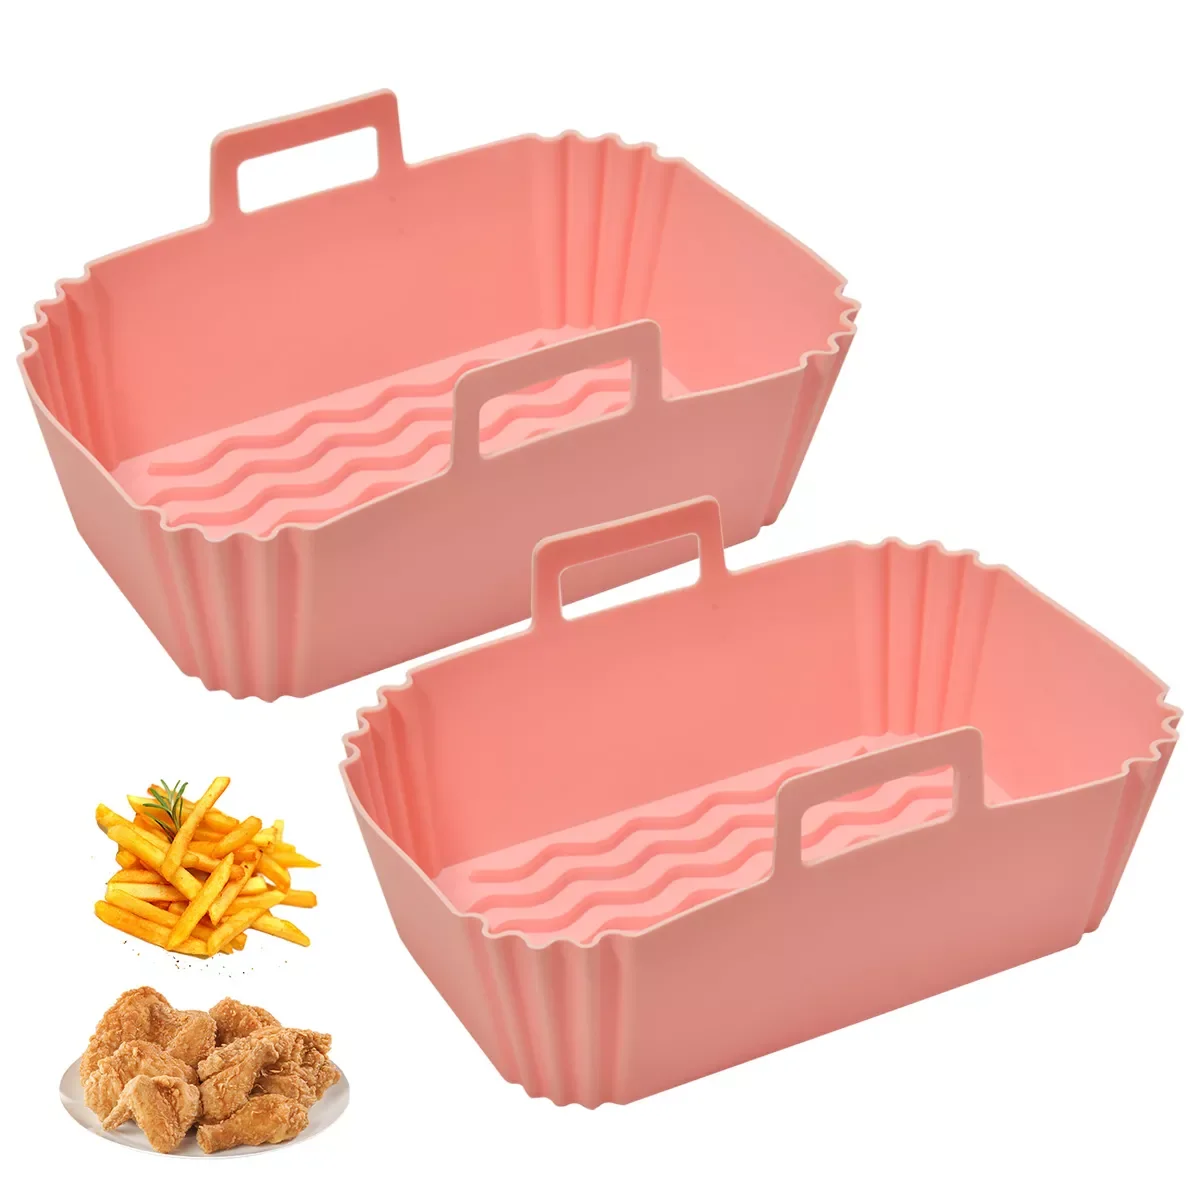 

2Pcs Air Fryers Oven Baking Tray Fried Chicken Basket Mat AirFryer Silicone Pot Replacemen Grill Pan Ninja Kitchen Accessories